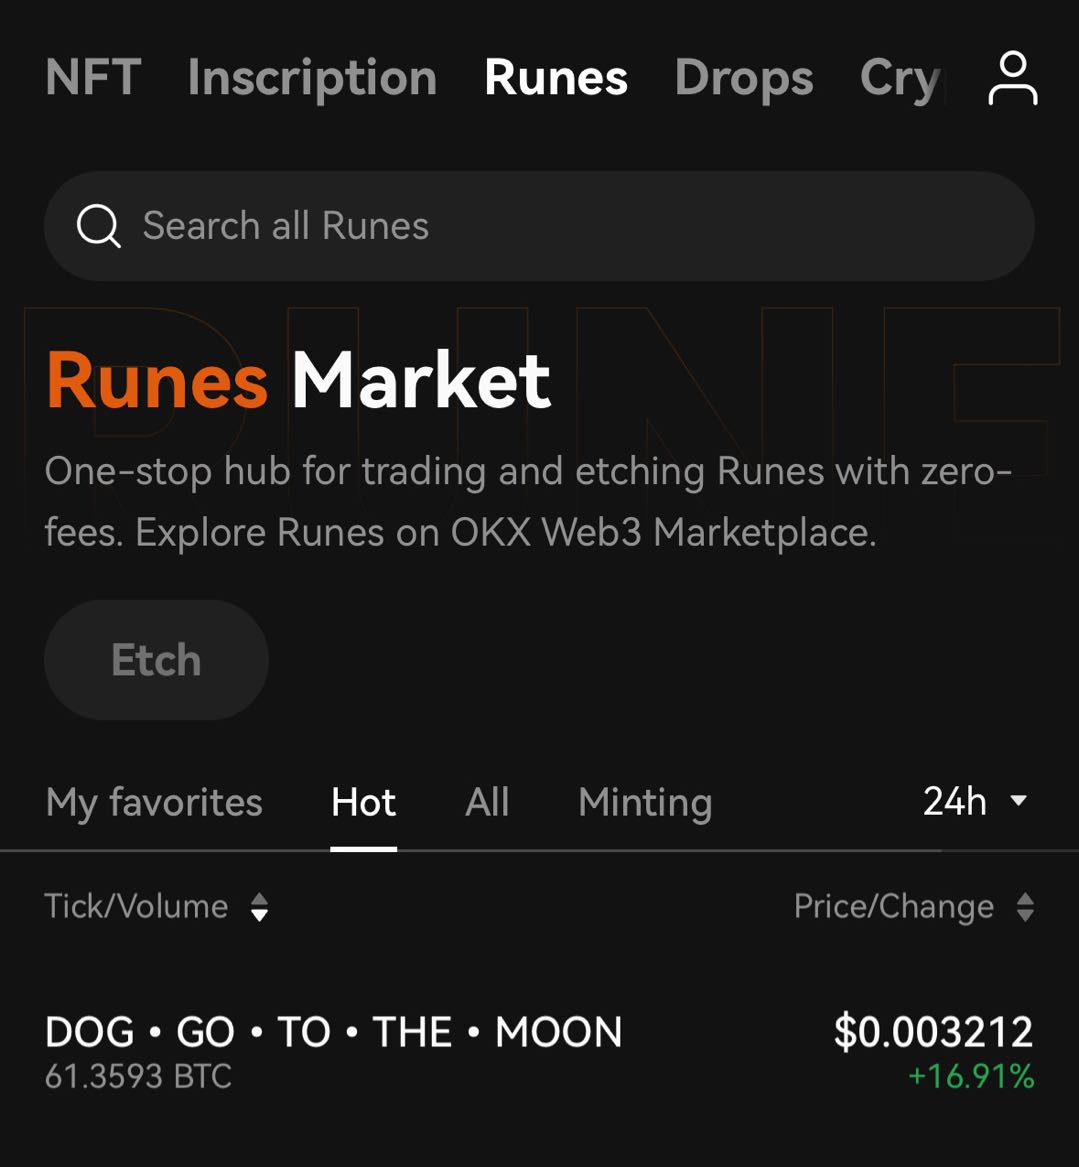 Checkout this new listing on our #Runes Marketplace 👀 $DOG